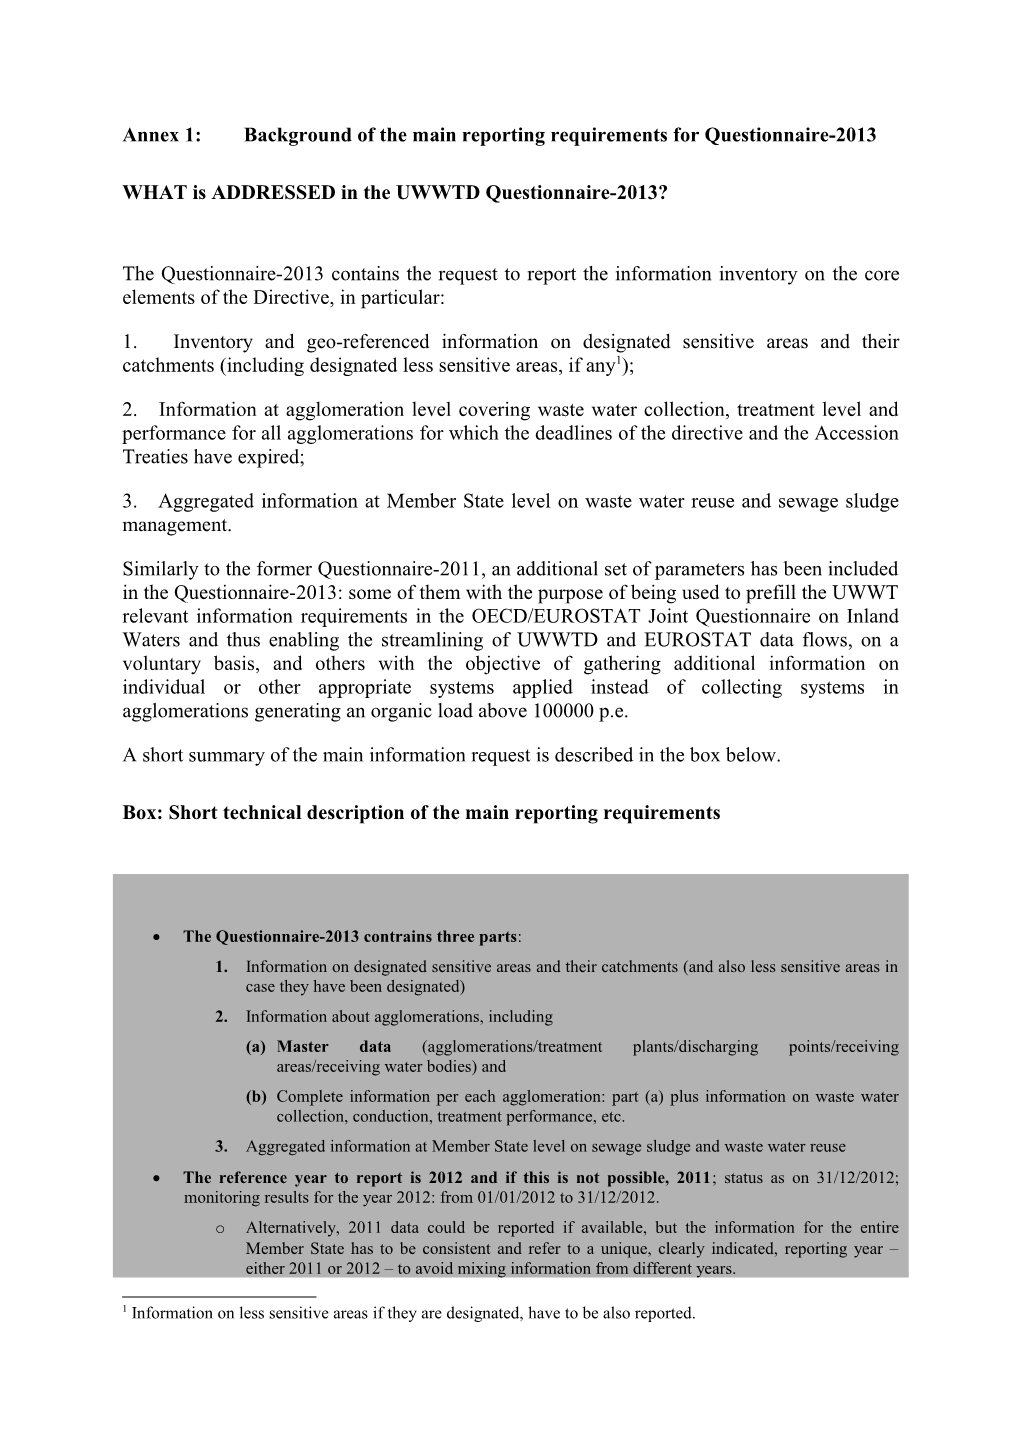 Annex 1:Background of the Main Reporting Requirements for Questionnaire-2013